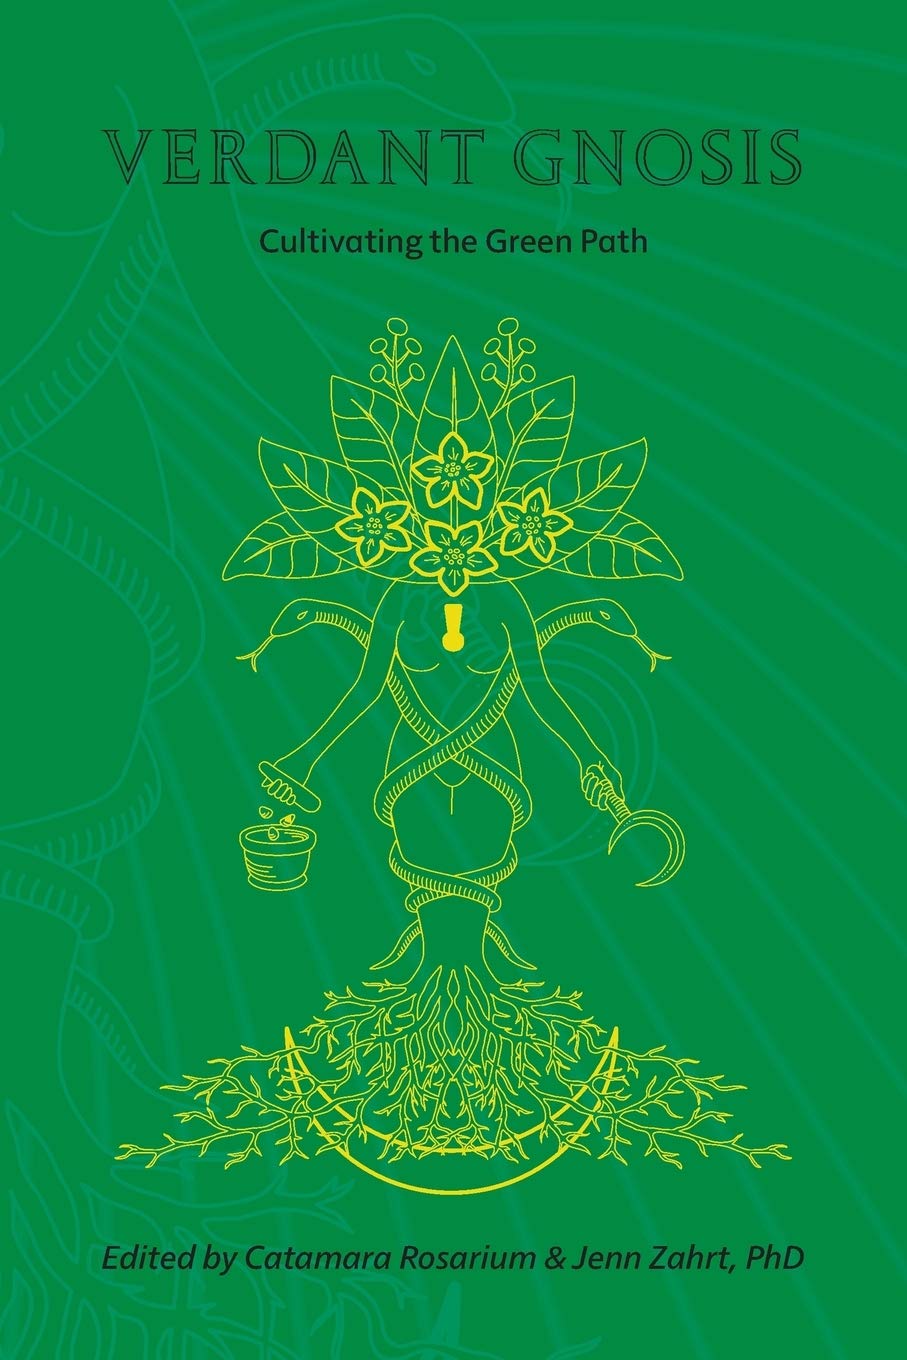 Verdant Gnosis: Cultivating the Green Path, vol. 1